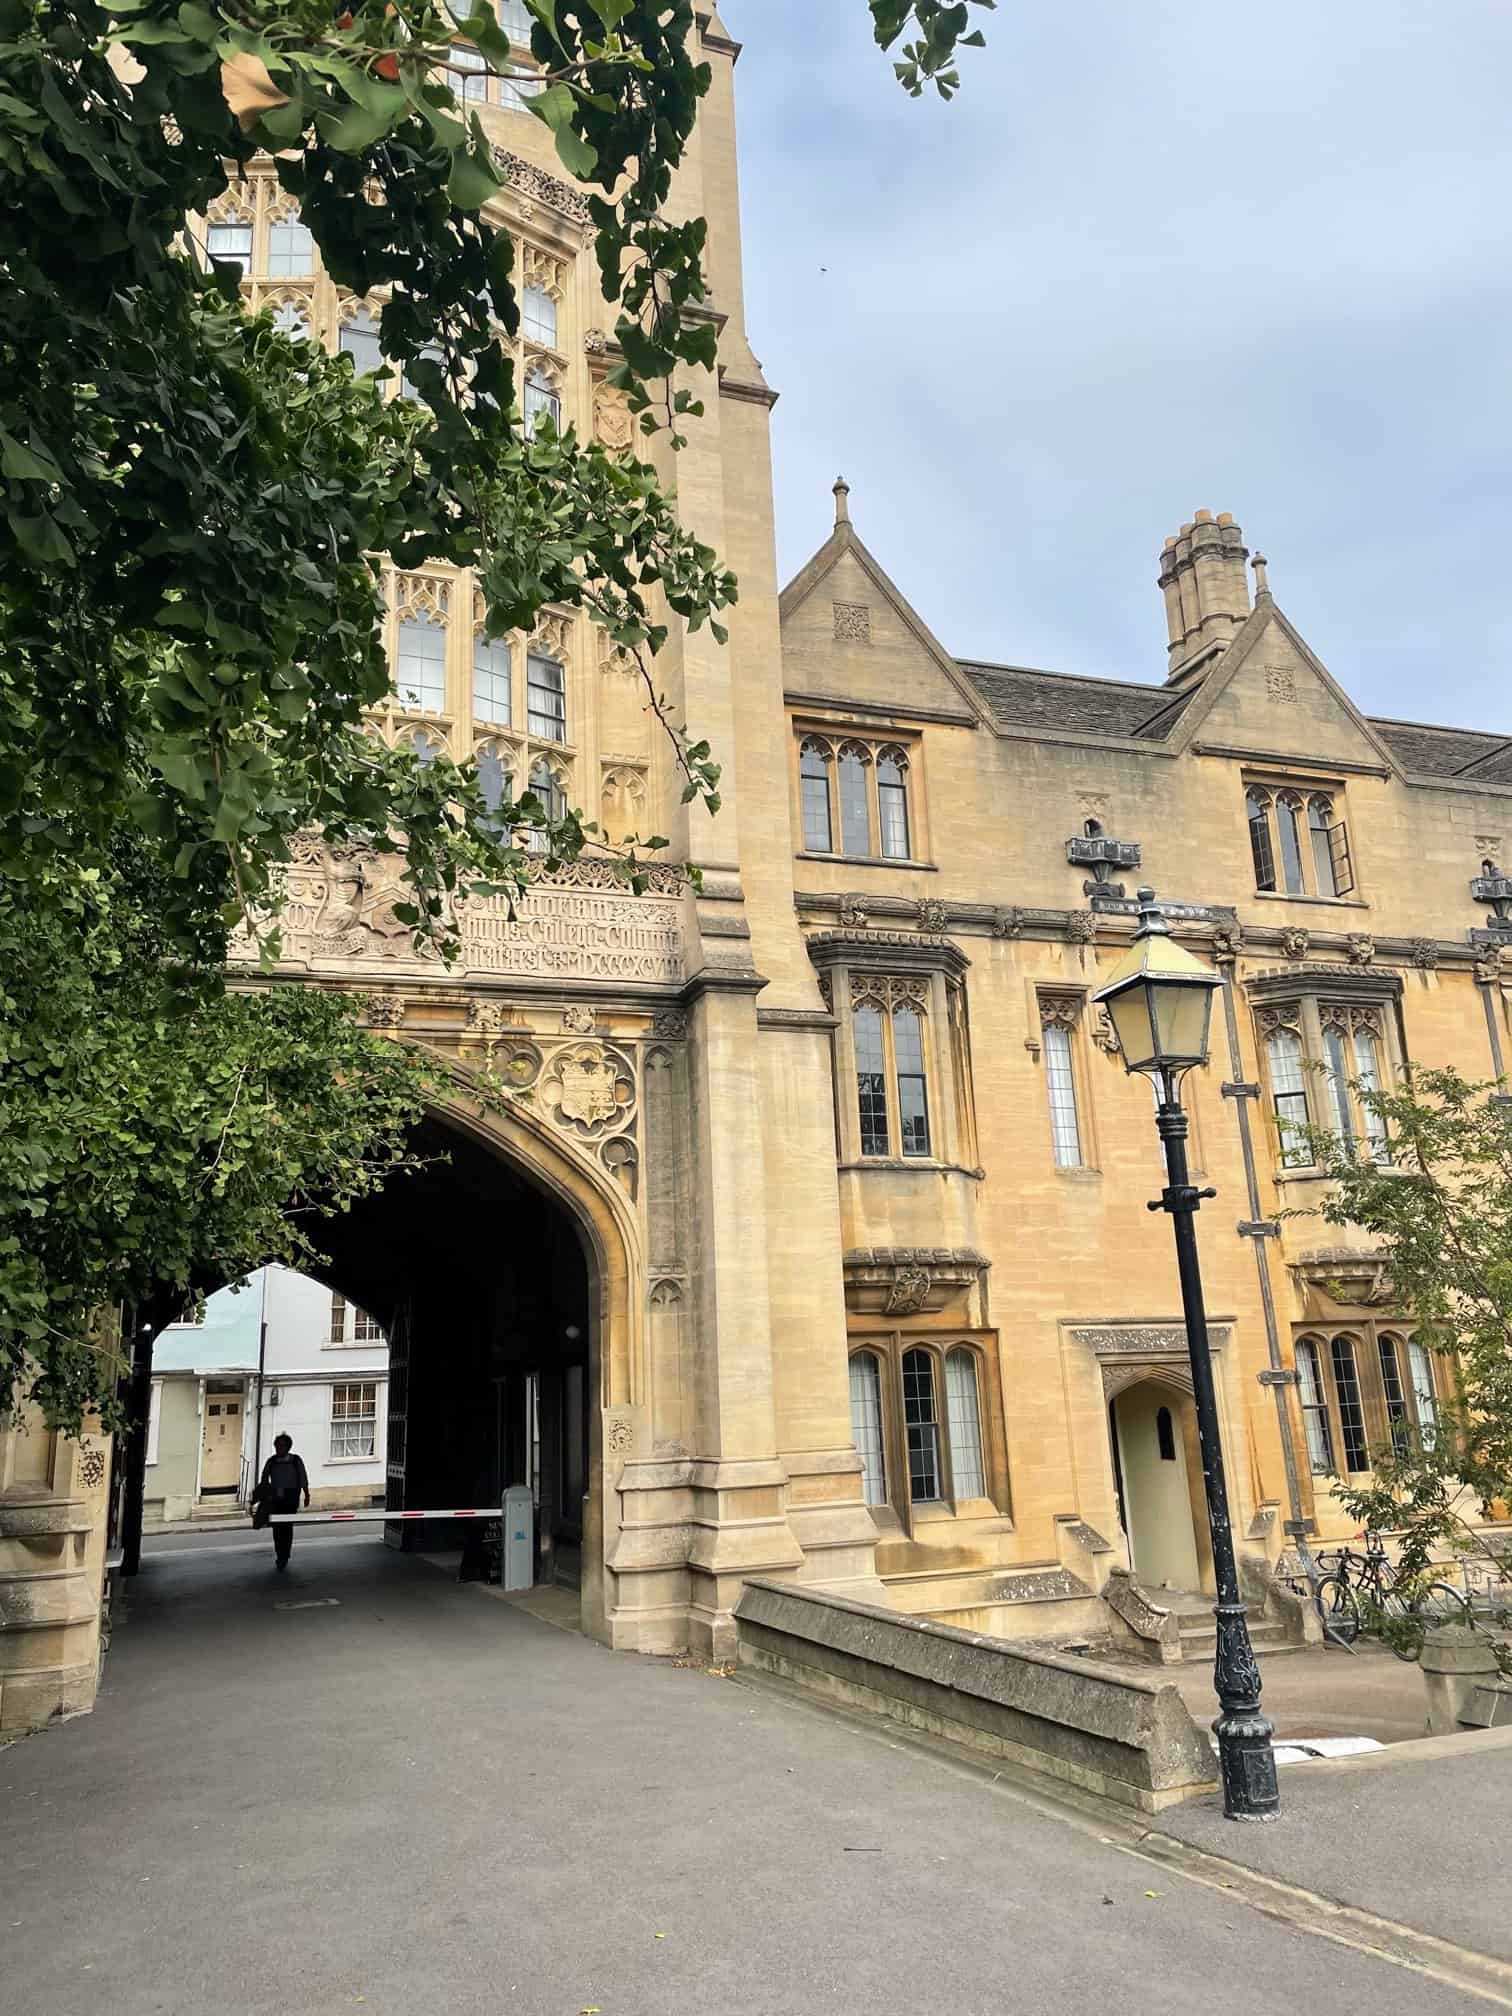 A building at the University of Oxford